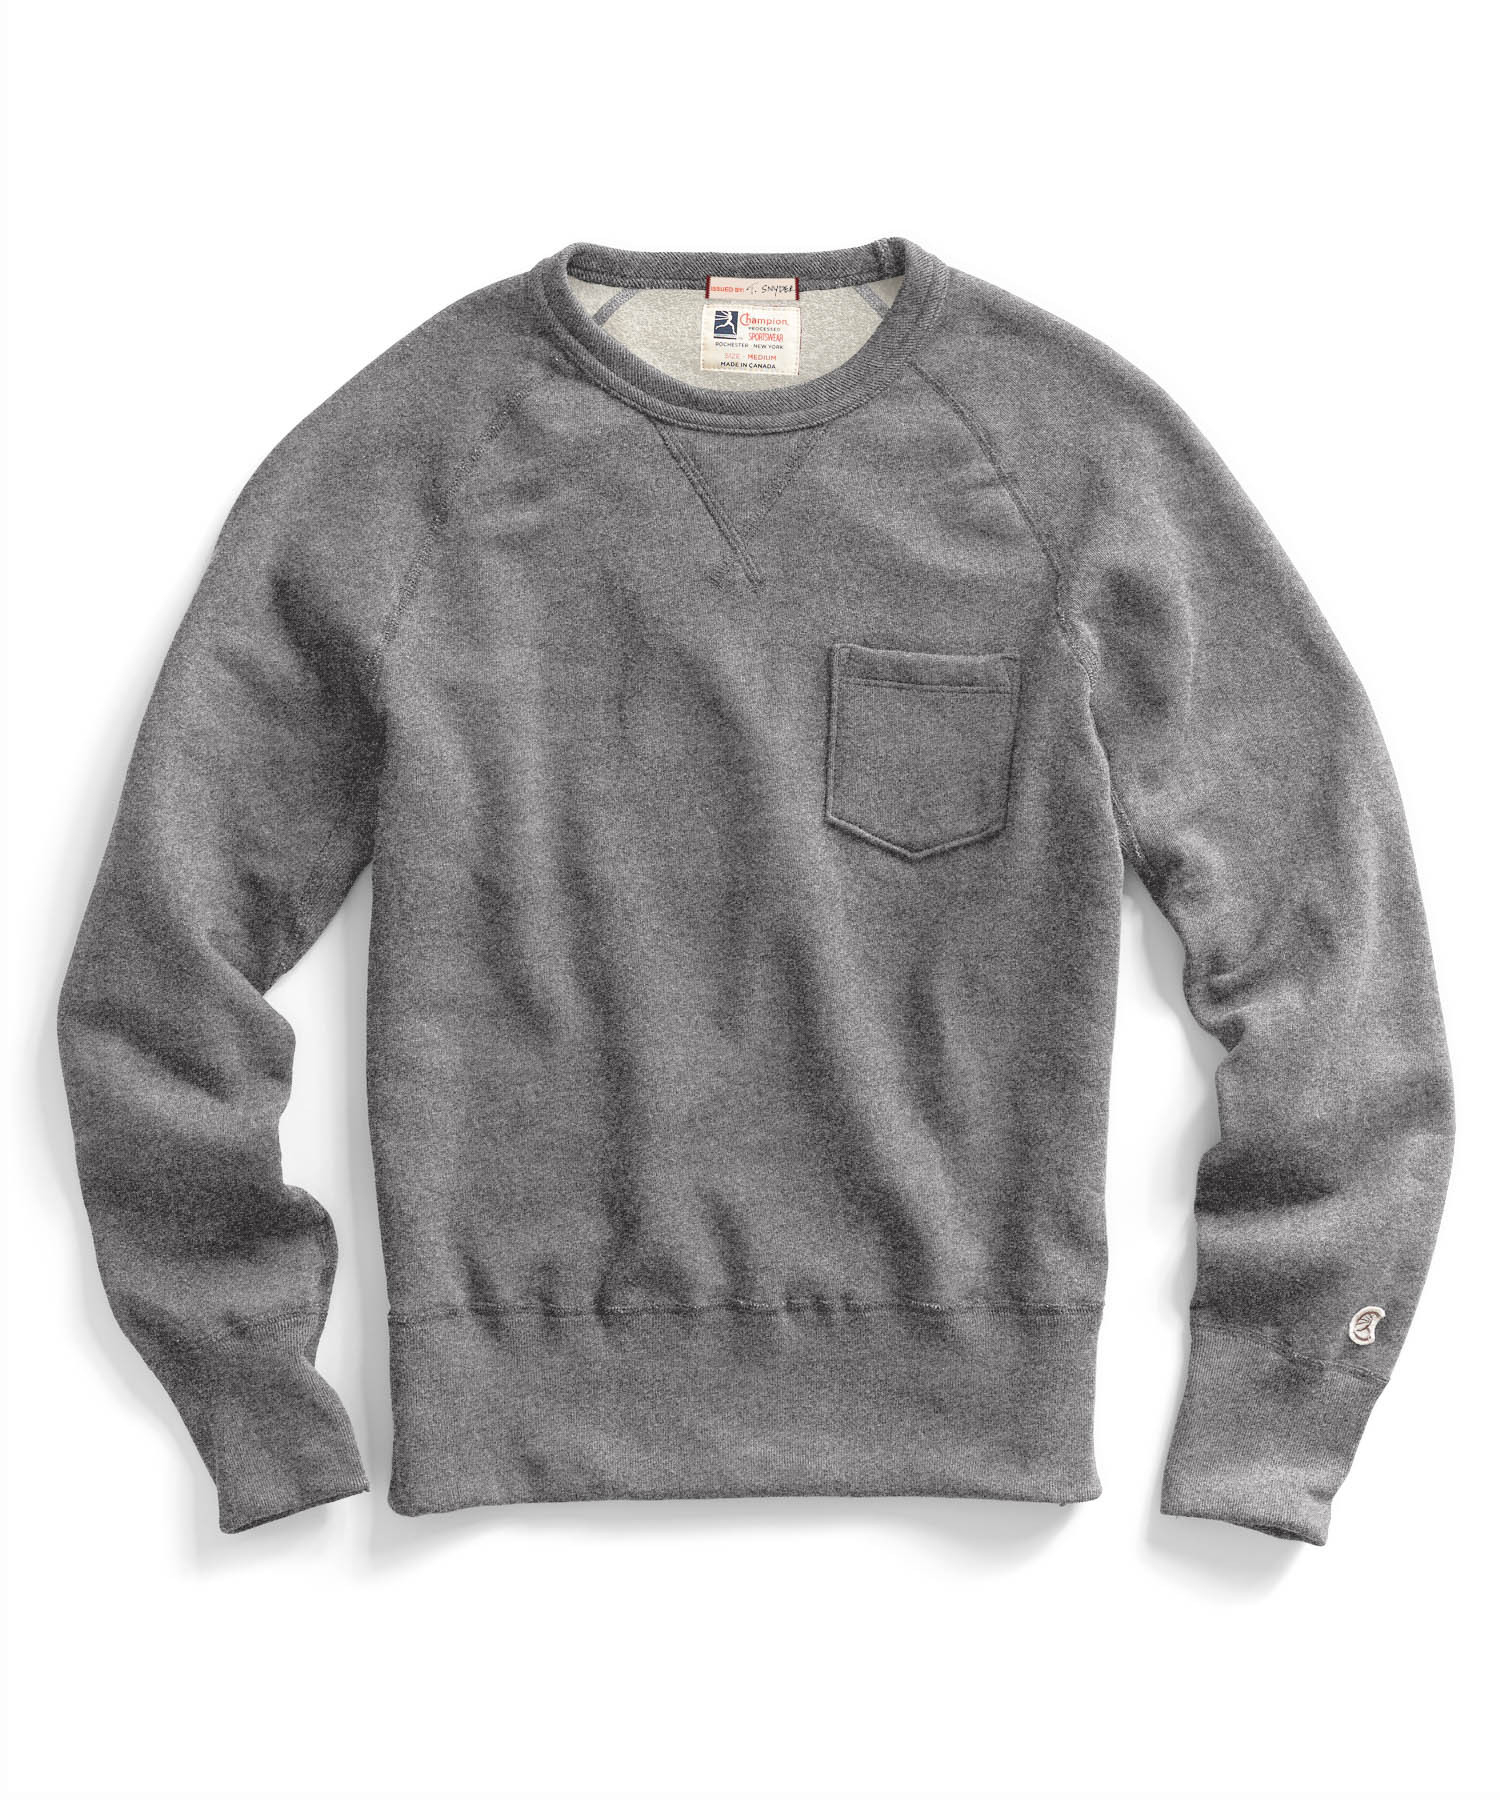 Todd snyder x champion Classic Pocket Sweatshirt In Salt And Pepper in ...